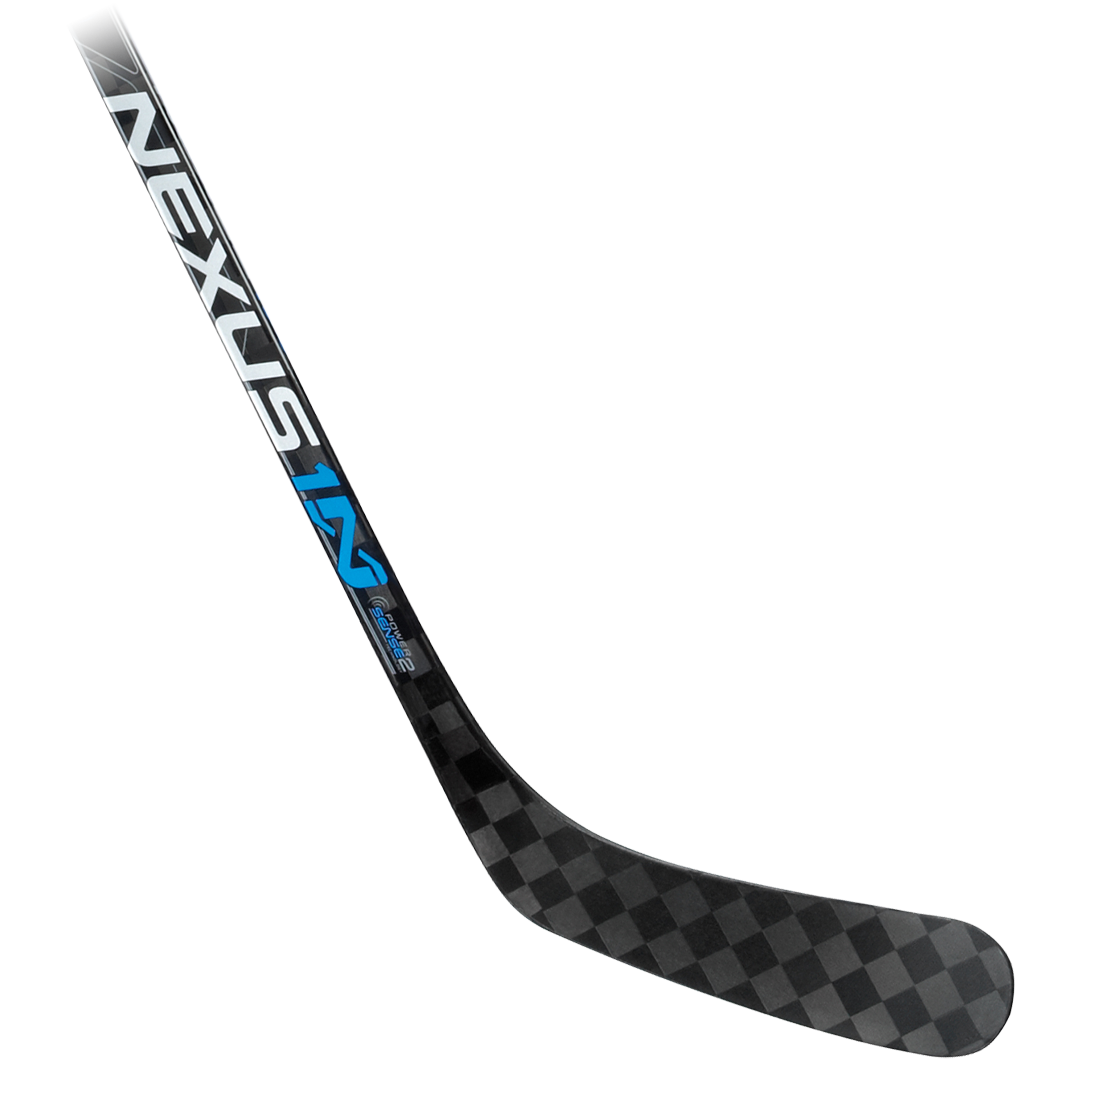 Hockey clipart transparent background. Stick png 